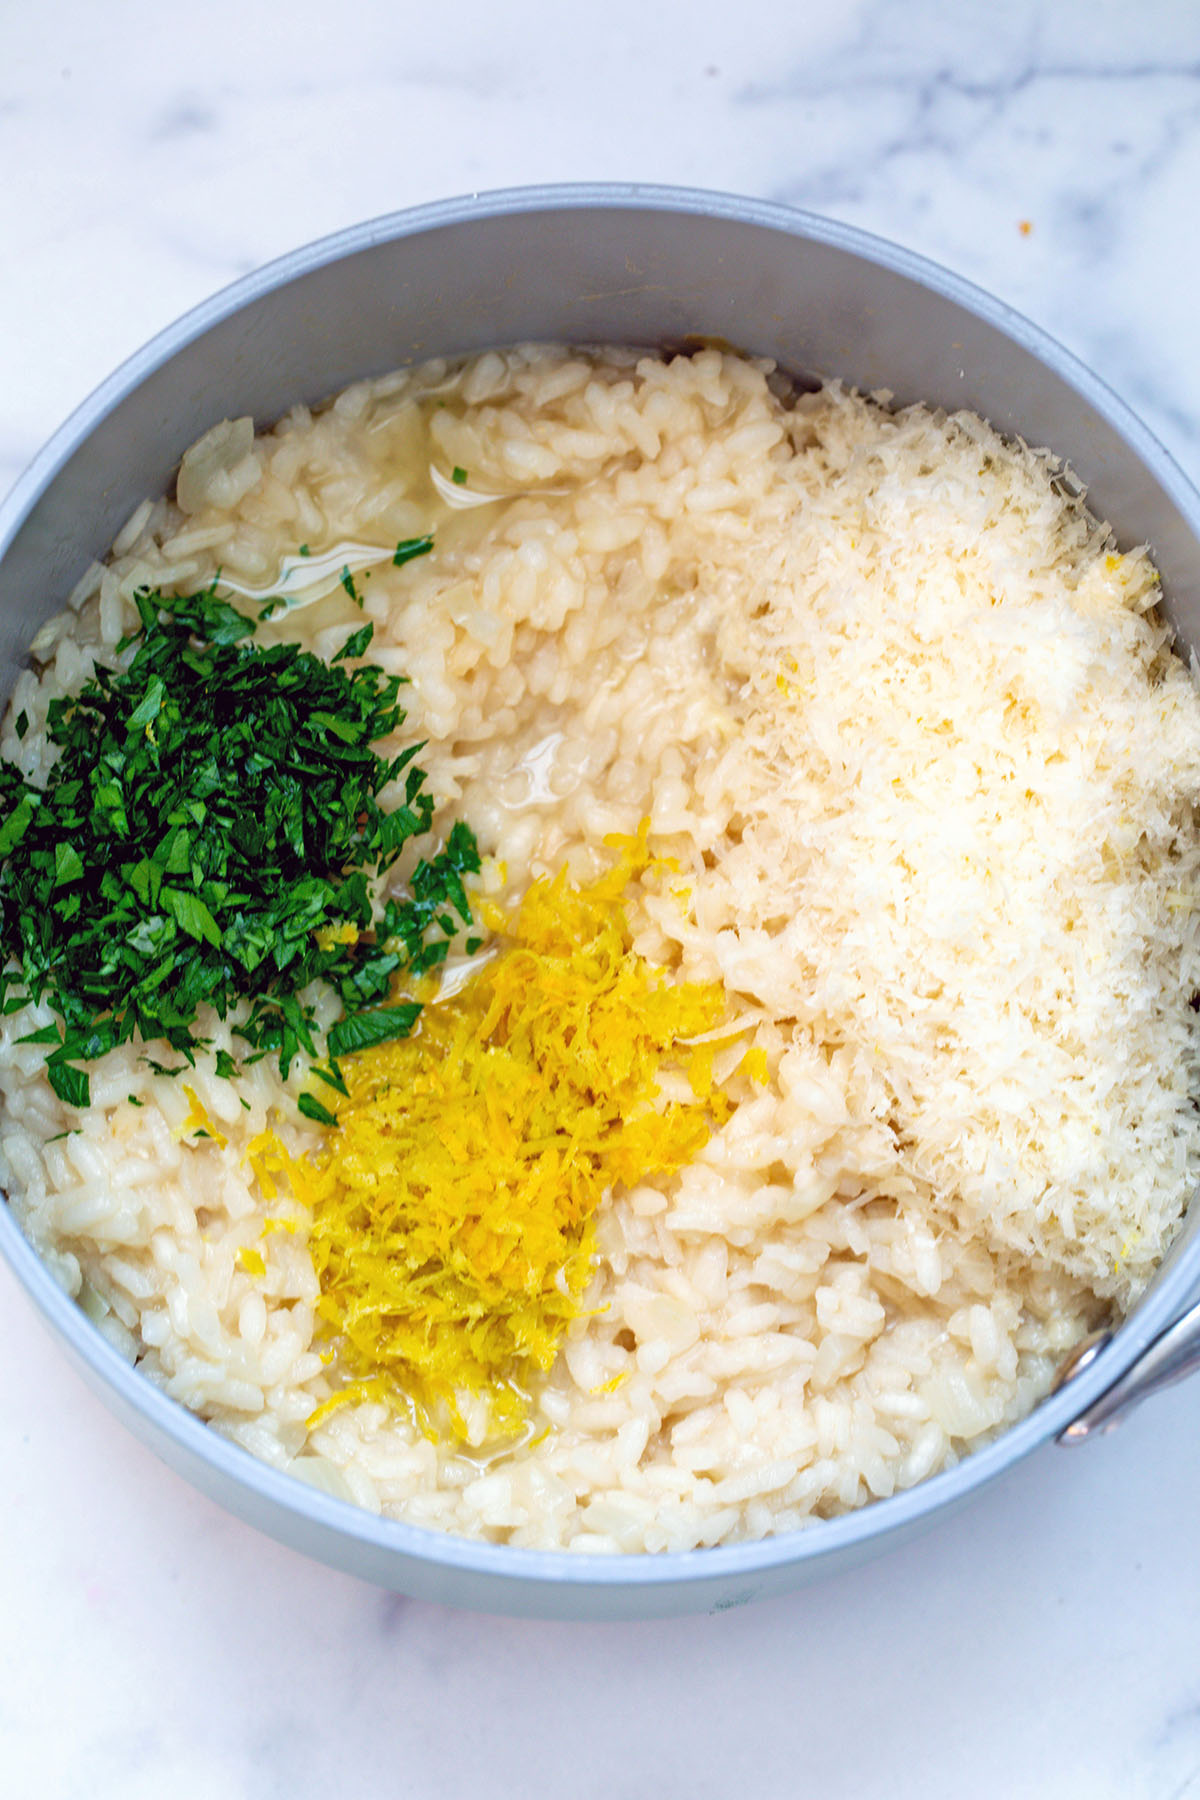 Risotto in saucepan with lemon zest, parsley, and parmesan cheese.